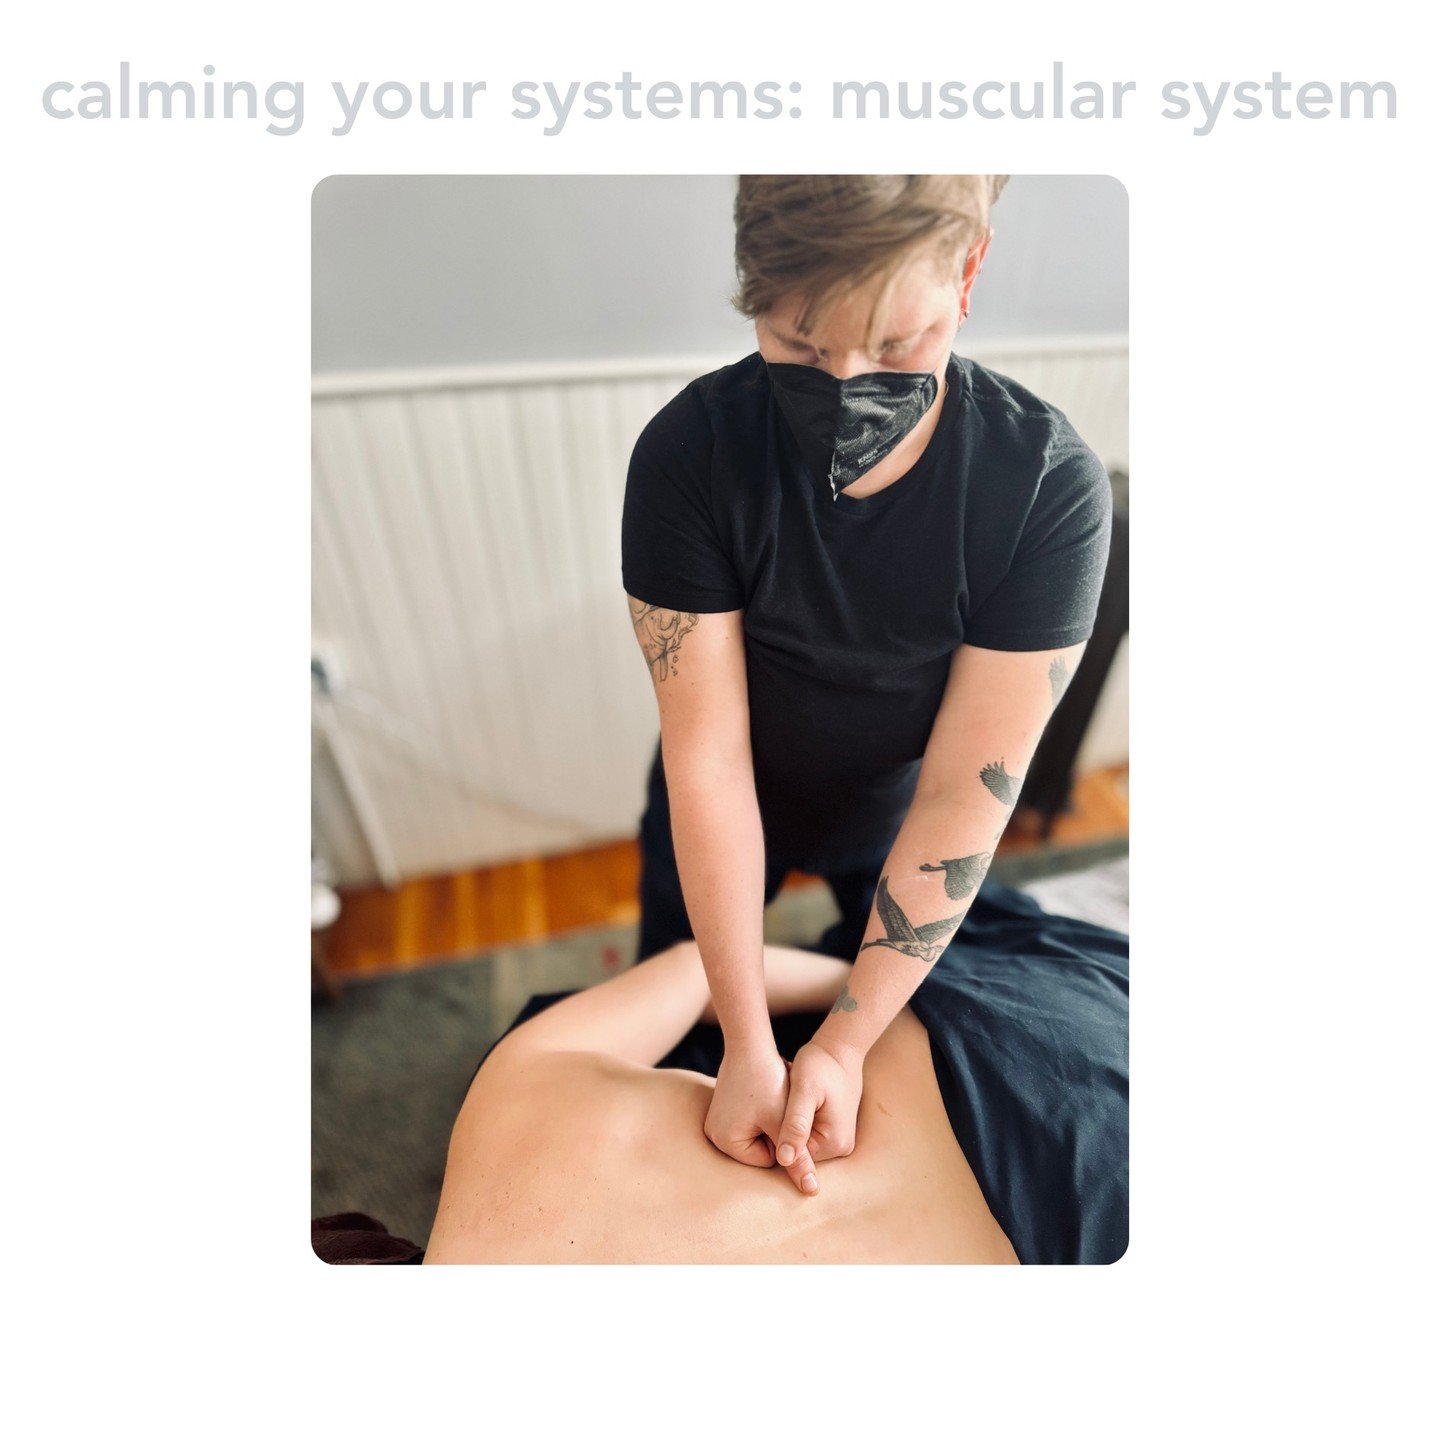 ✨✨✨massage can help communicate calm &amp; safety to help balance out chronic stress ✨✨✨ Calming your systems - the muscular system: &ldquo;When the body is stressed, muscles tense up. Muscle tension is almost a reflex reaction to stress &mdash; the 